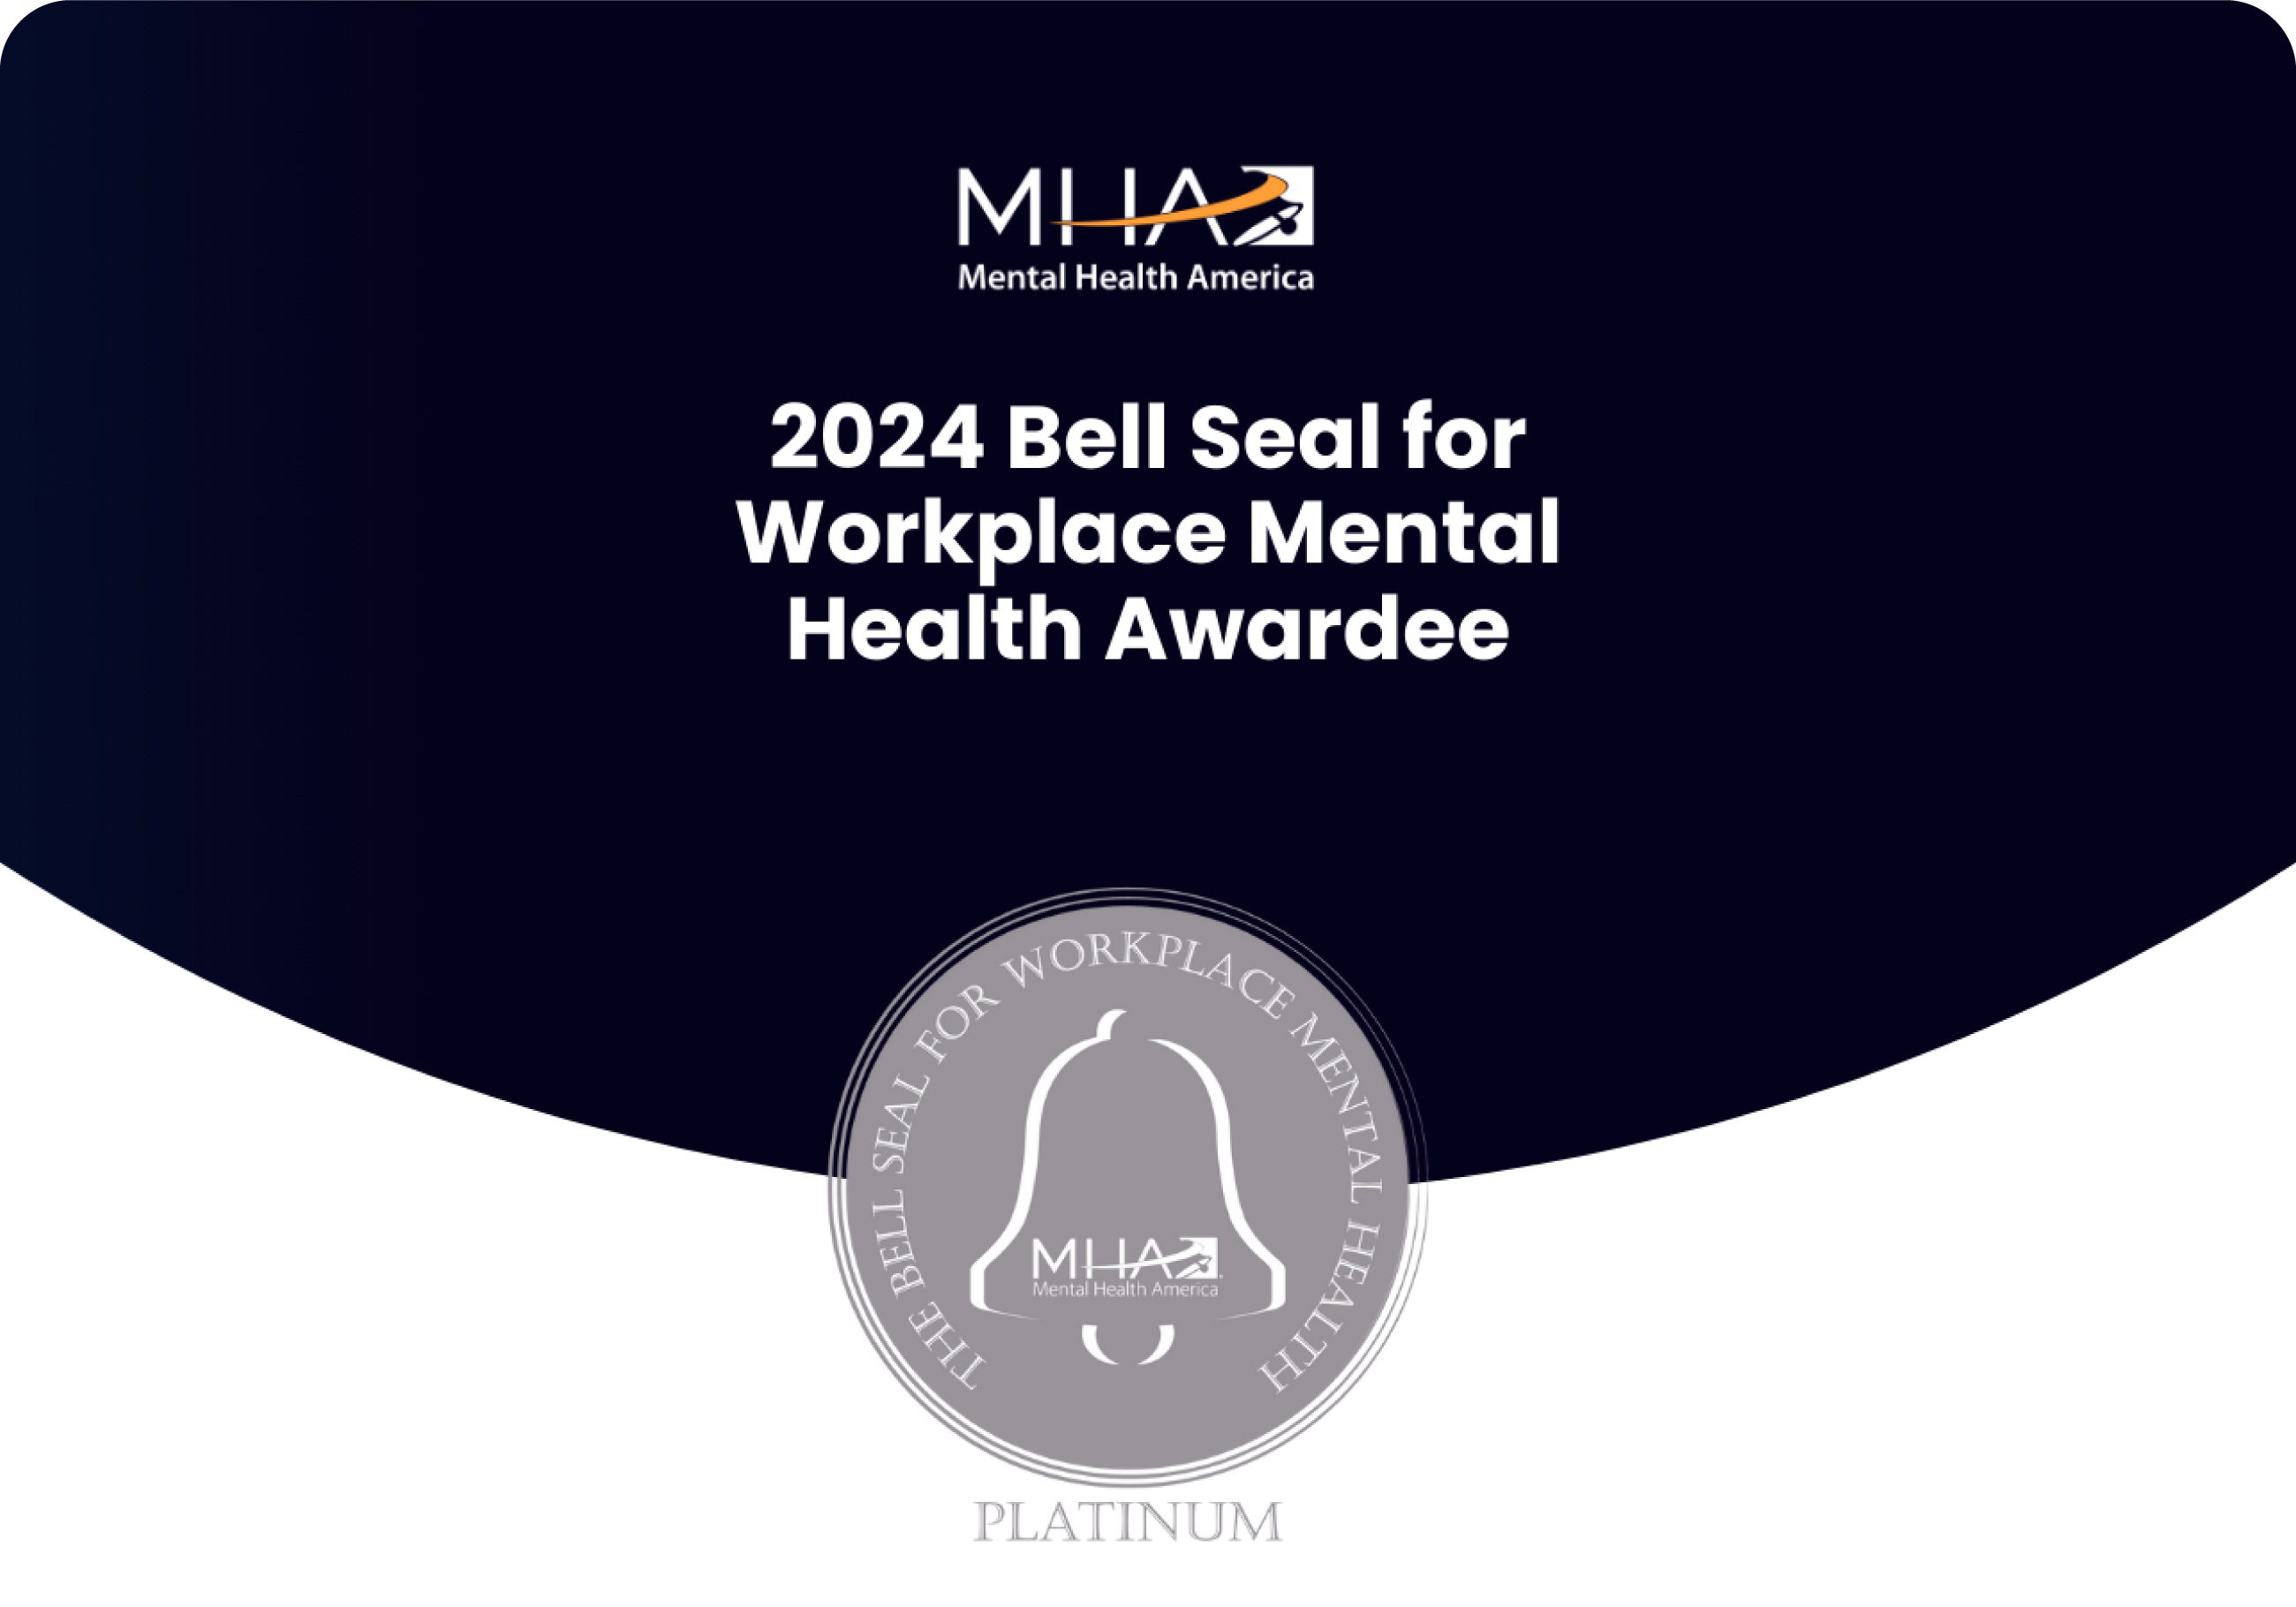 2024 Bell Seal for Workplace Mental Health Awarded to Harris